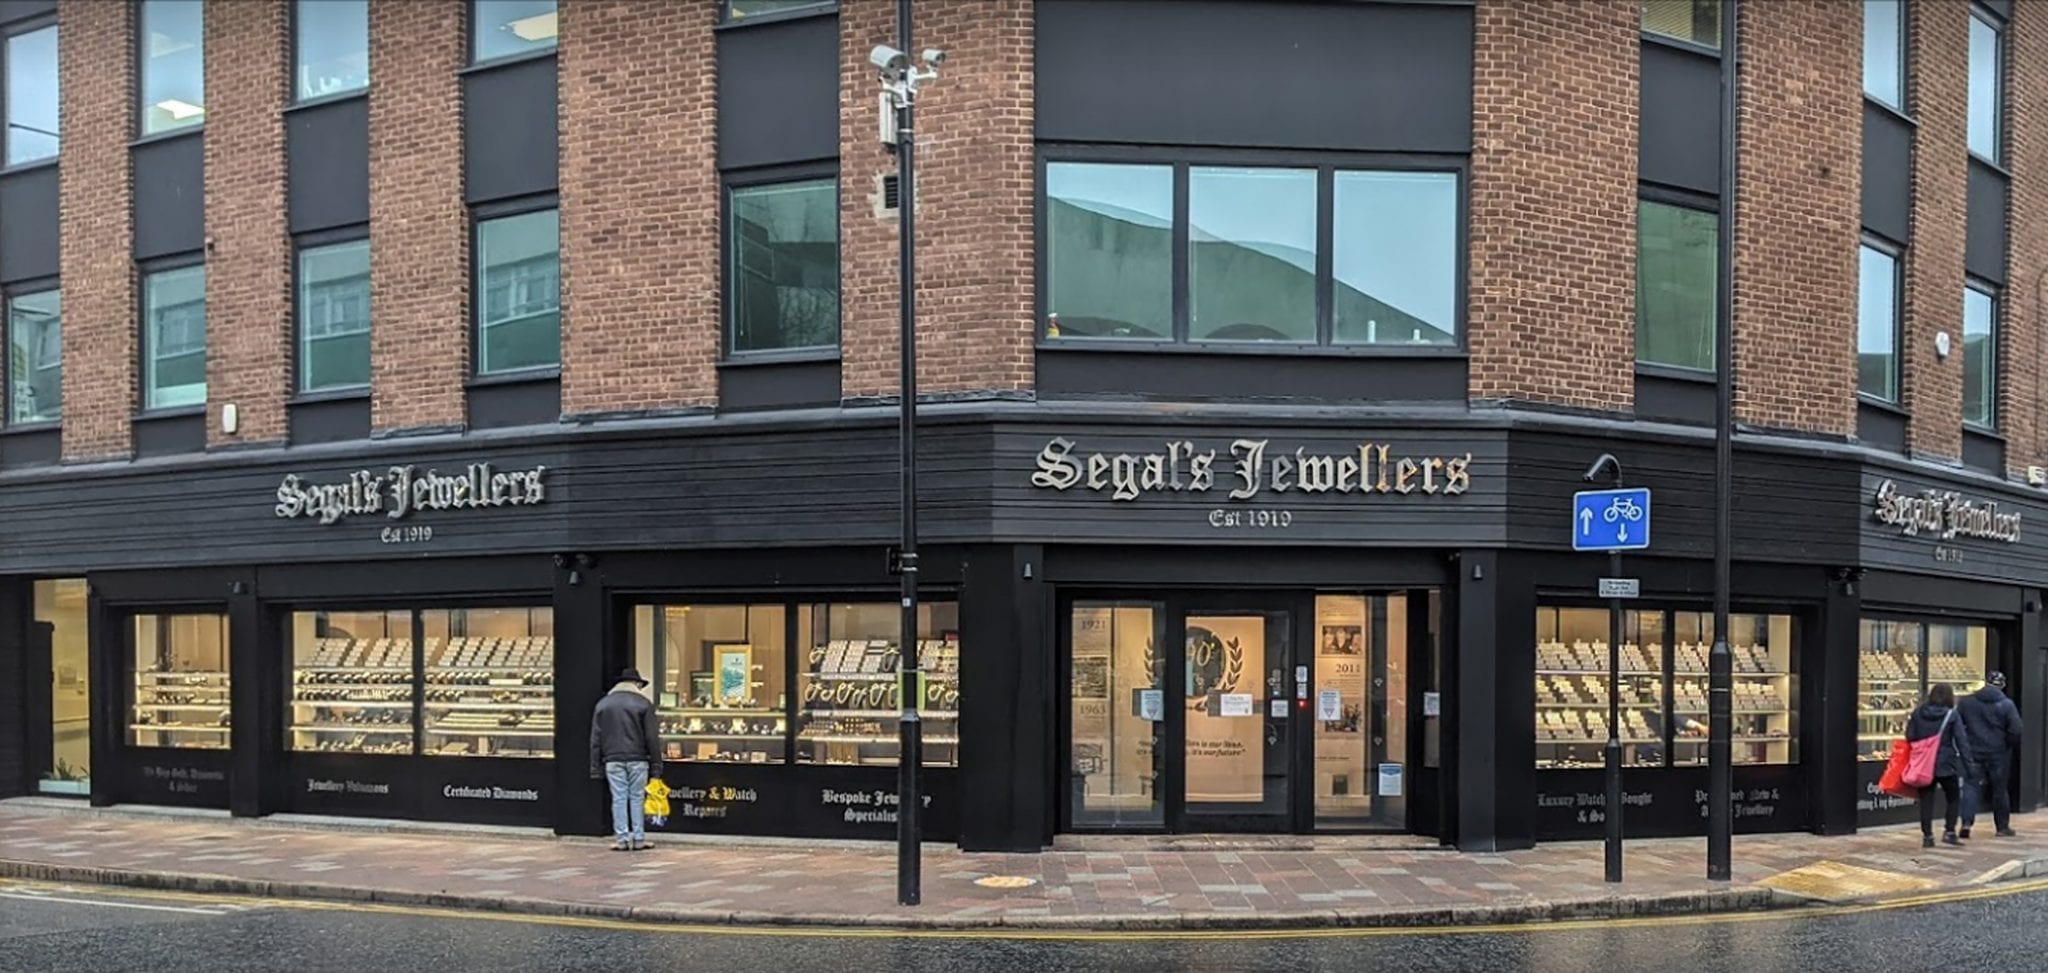 Long Jewellery store shopfront with Warrior Sliding Interlock and Displays. Large sign reading "Segals Jewellers".